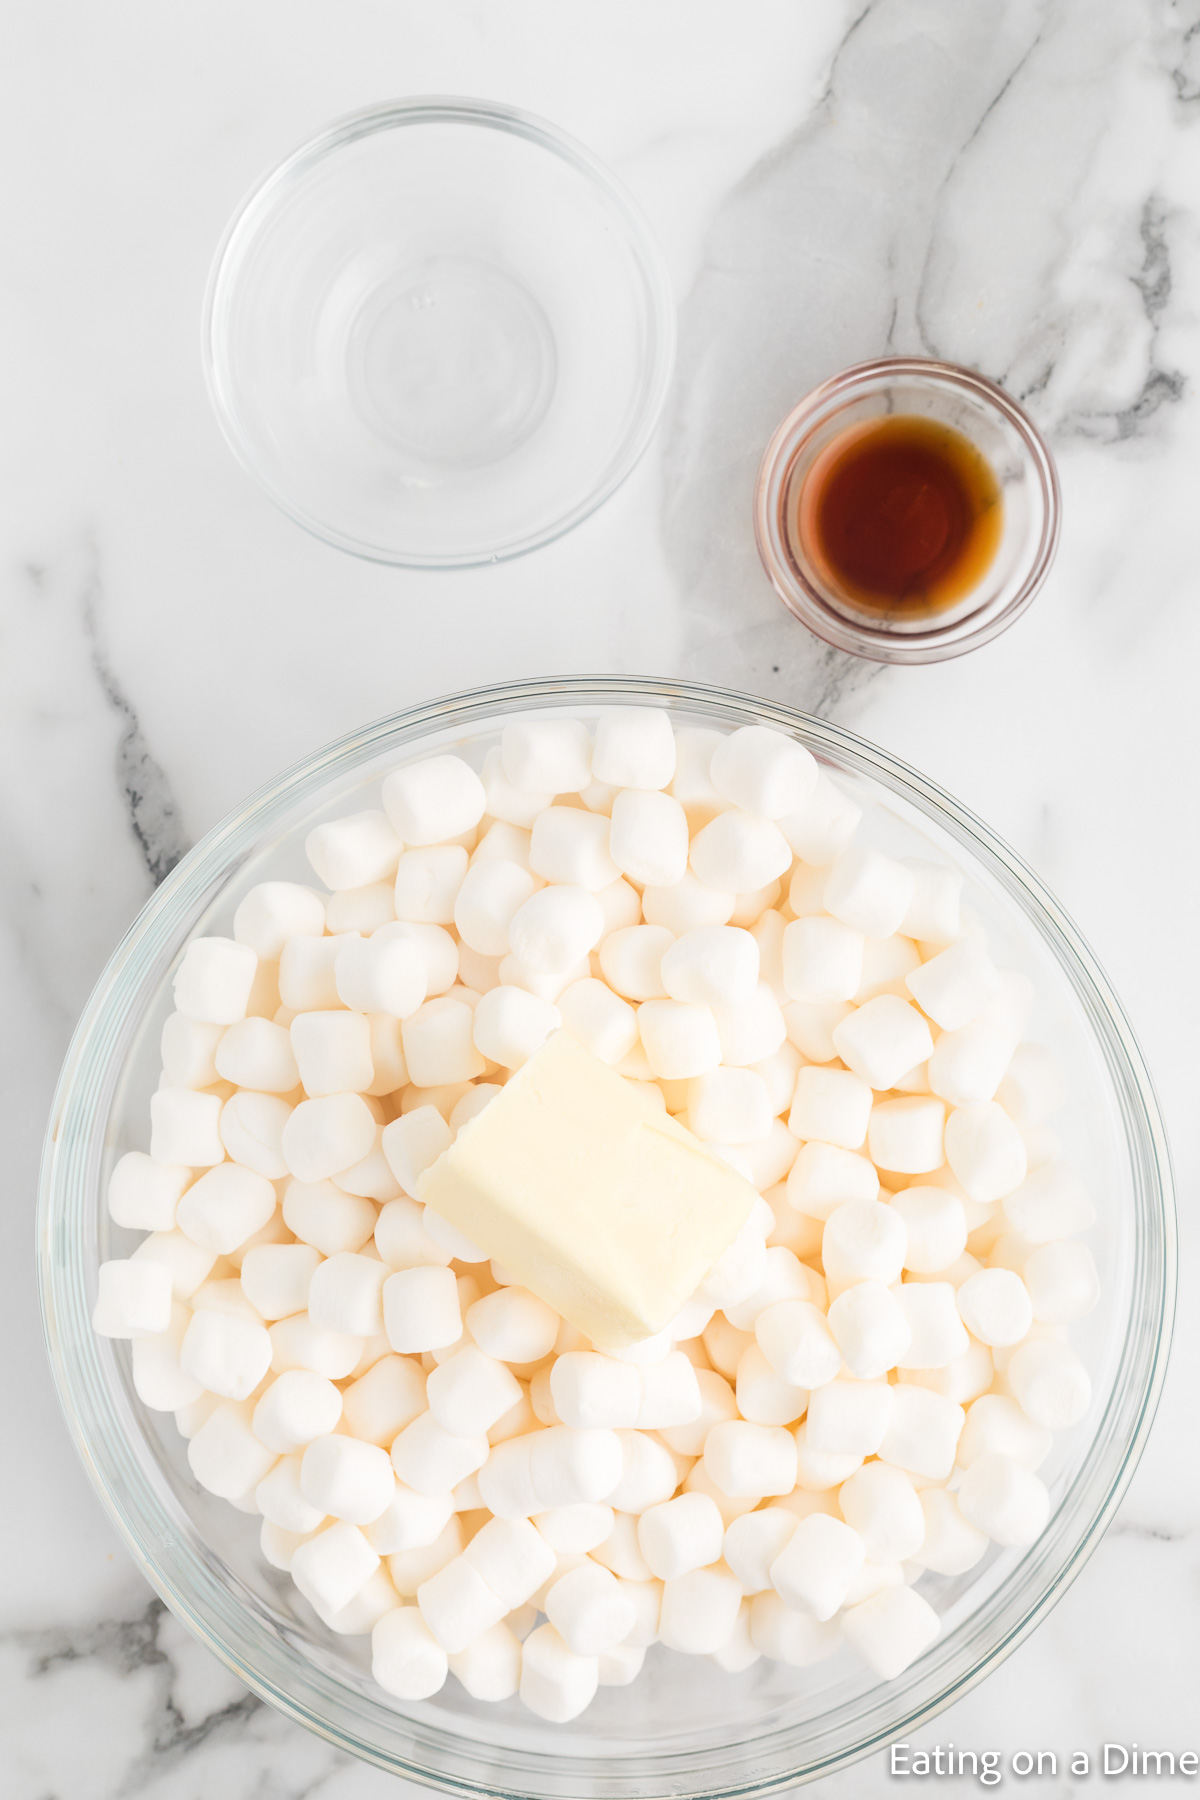 Placing marshmallows in a bowl with a stick of butter